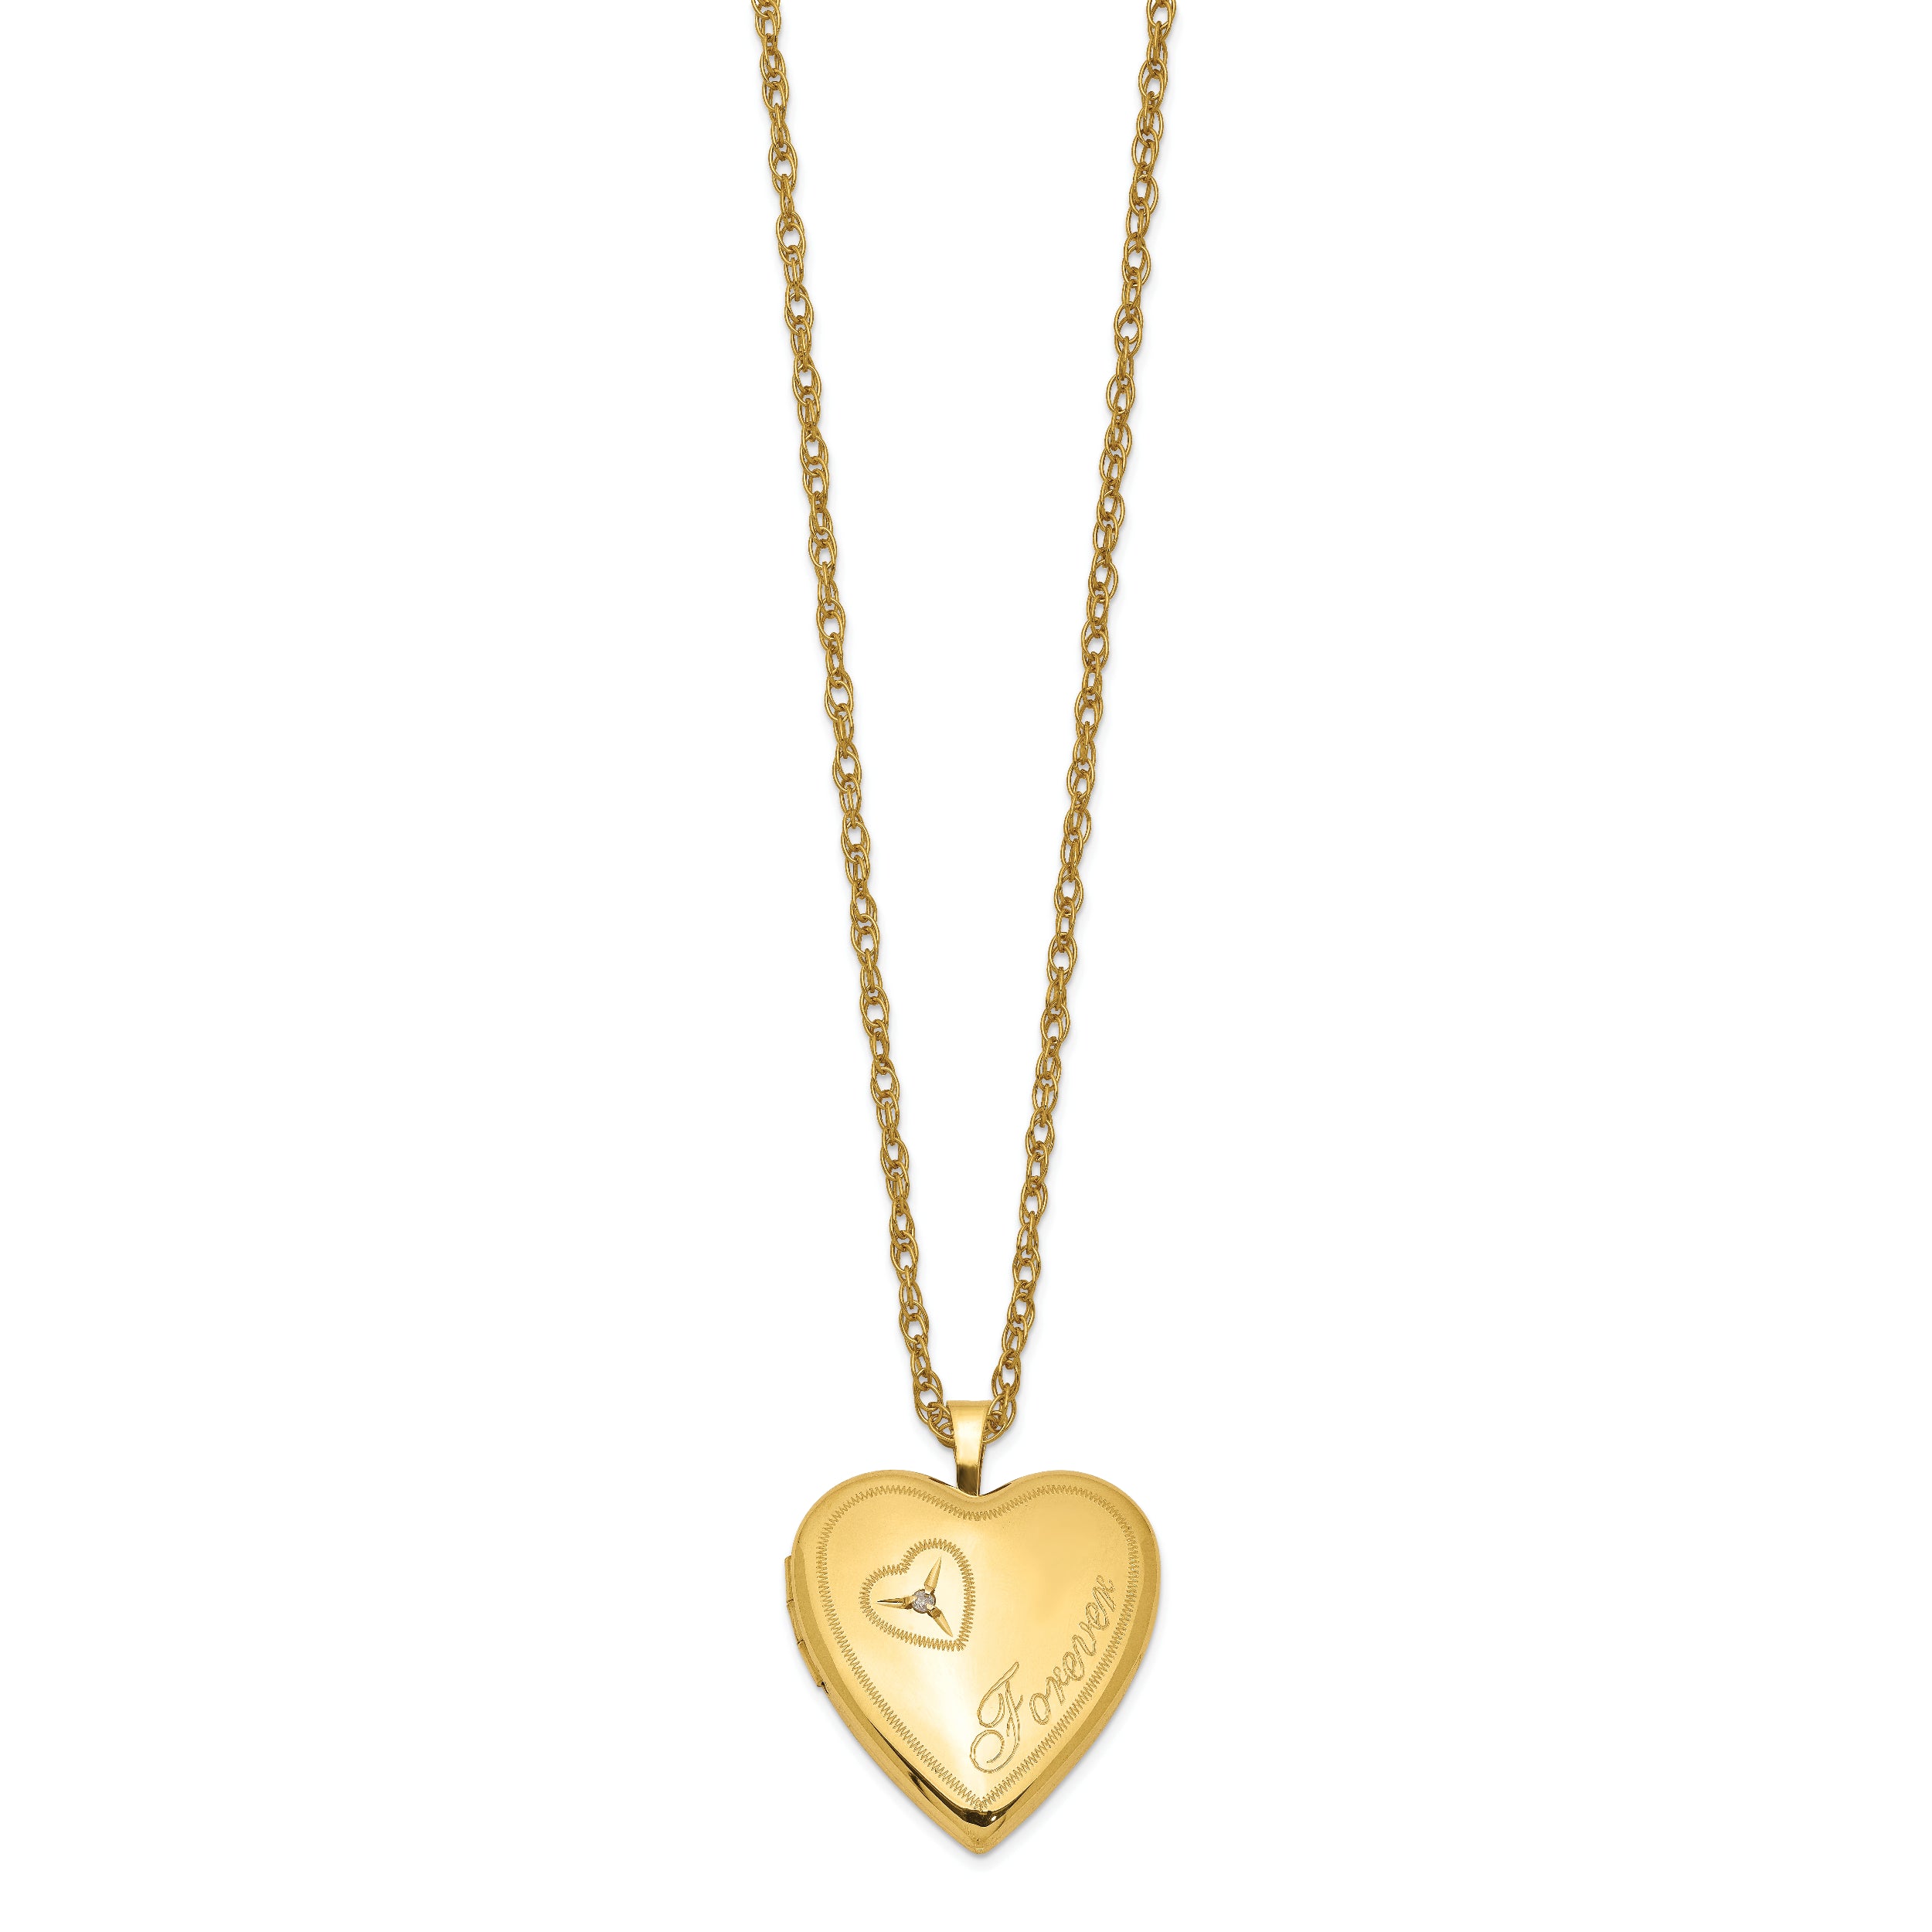 1/20 Gold Filled 20mm Diamond Forever Heart Locket Necklace